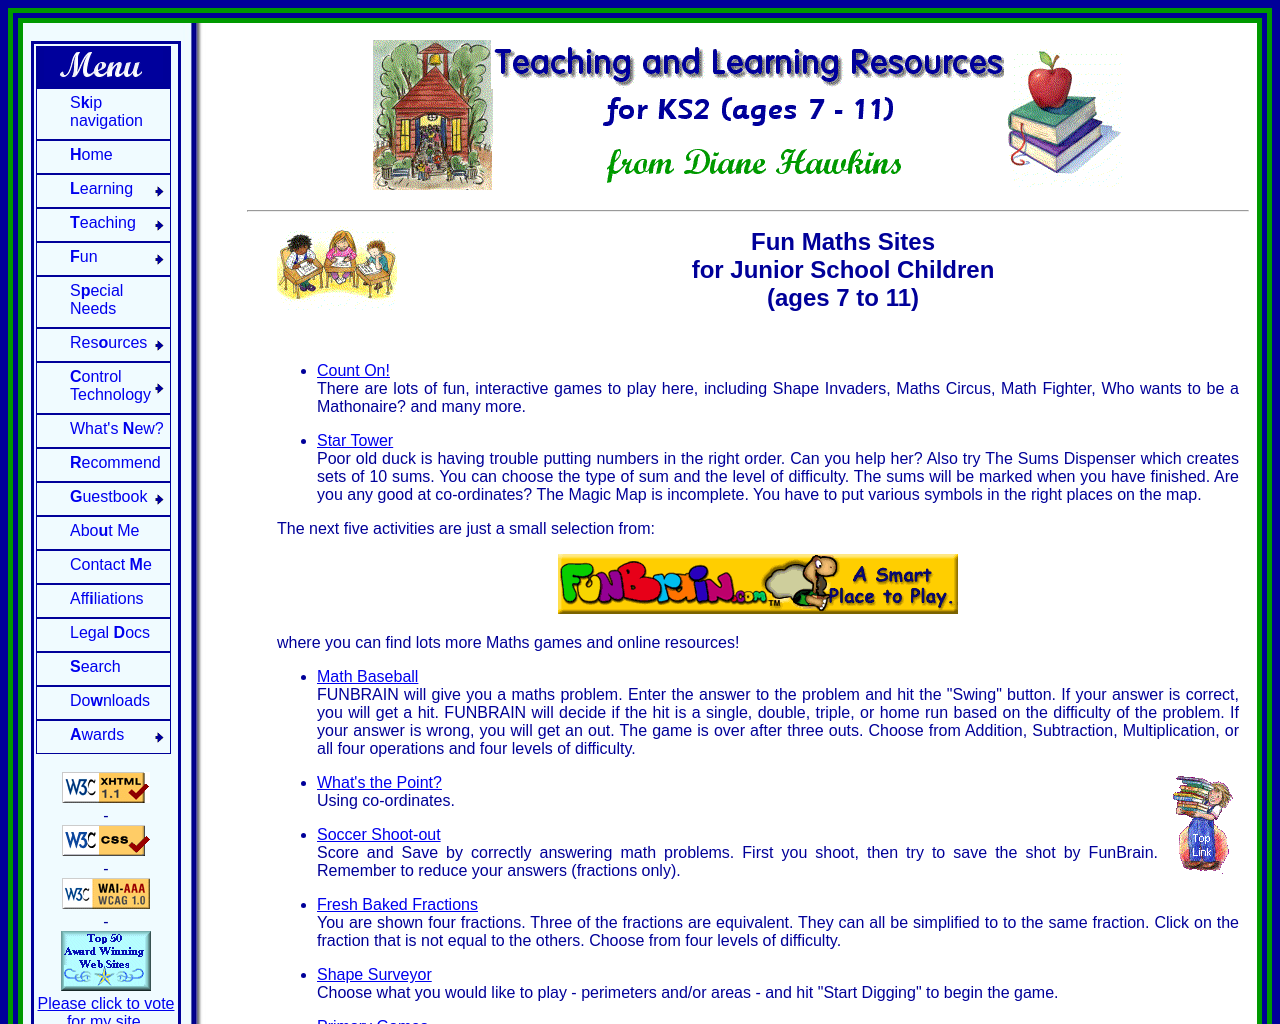 Teaching and Learning Resources